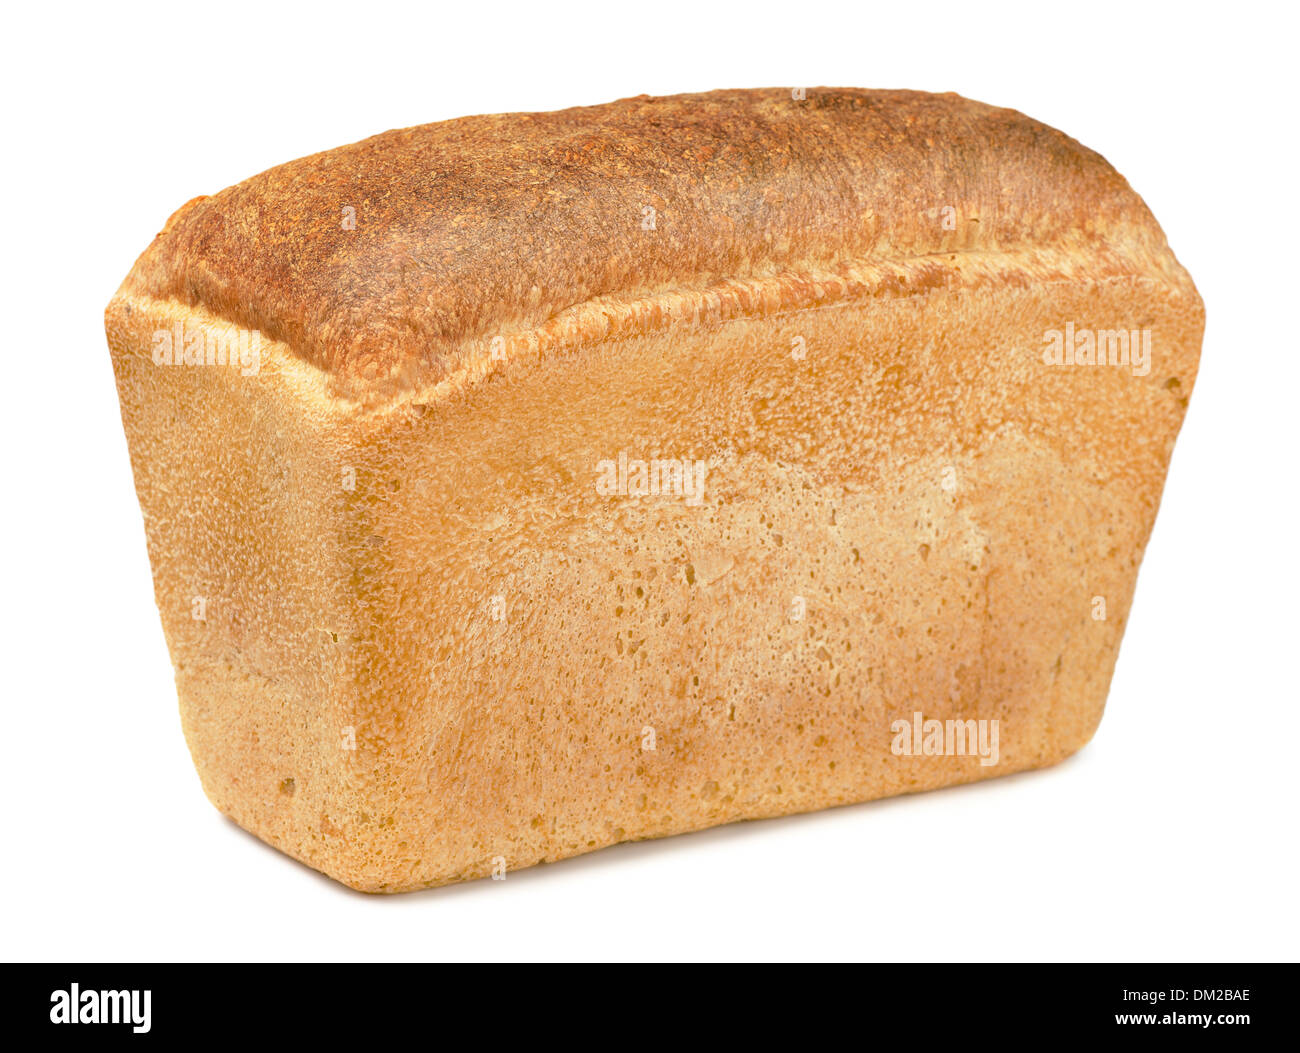 Whole fresh loaf of bread isolated on white Stock Photo